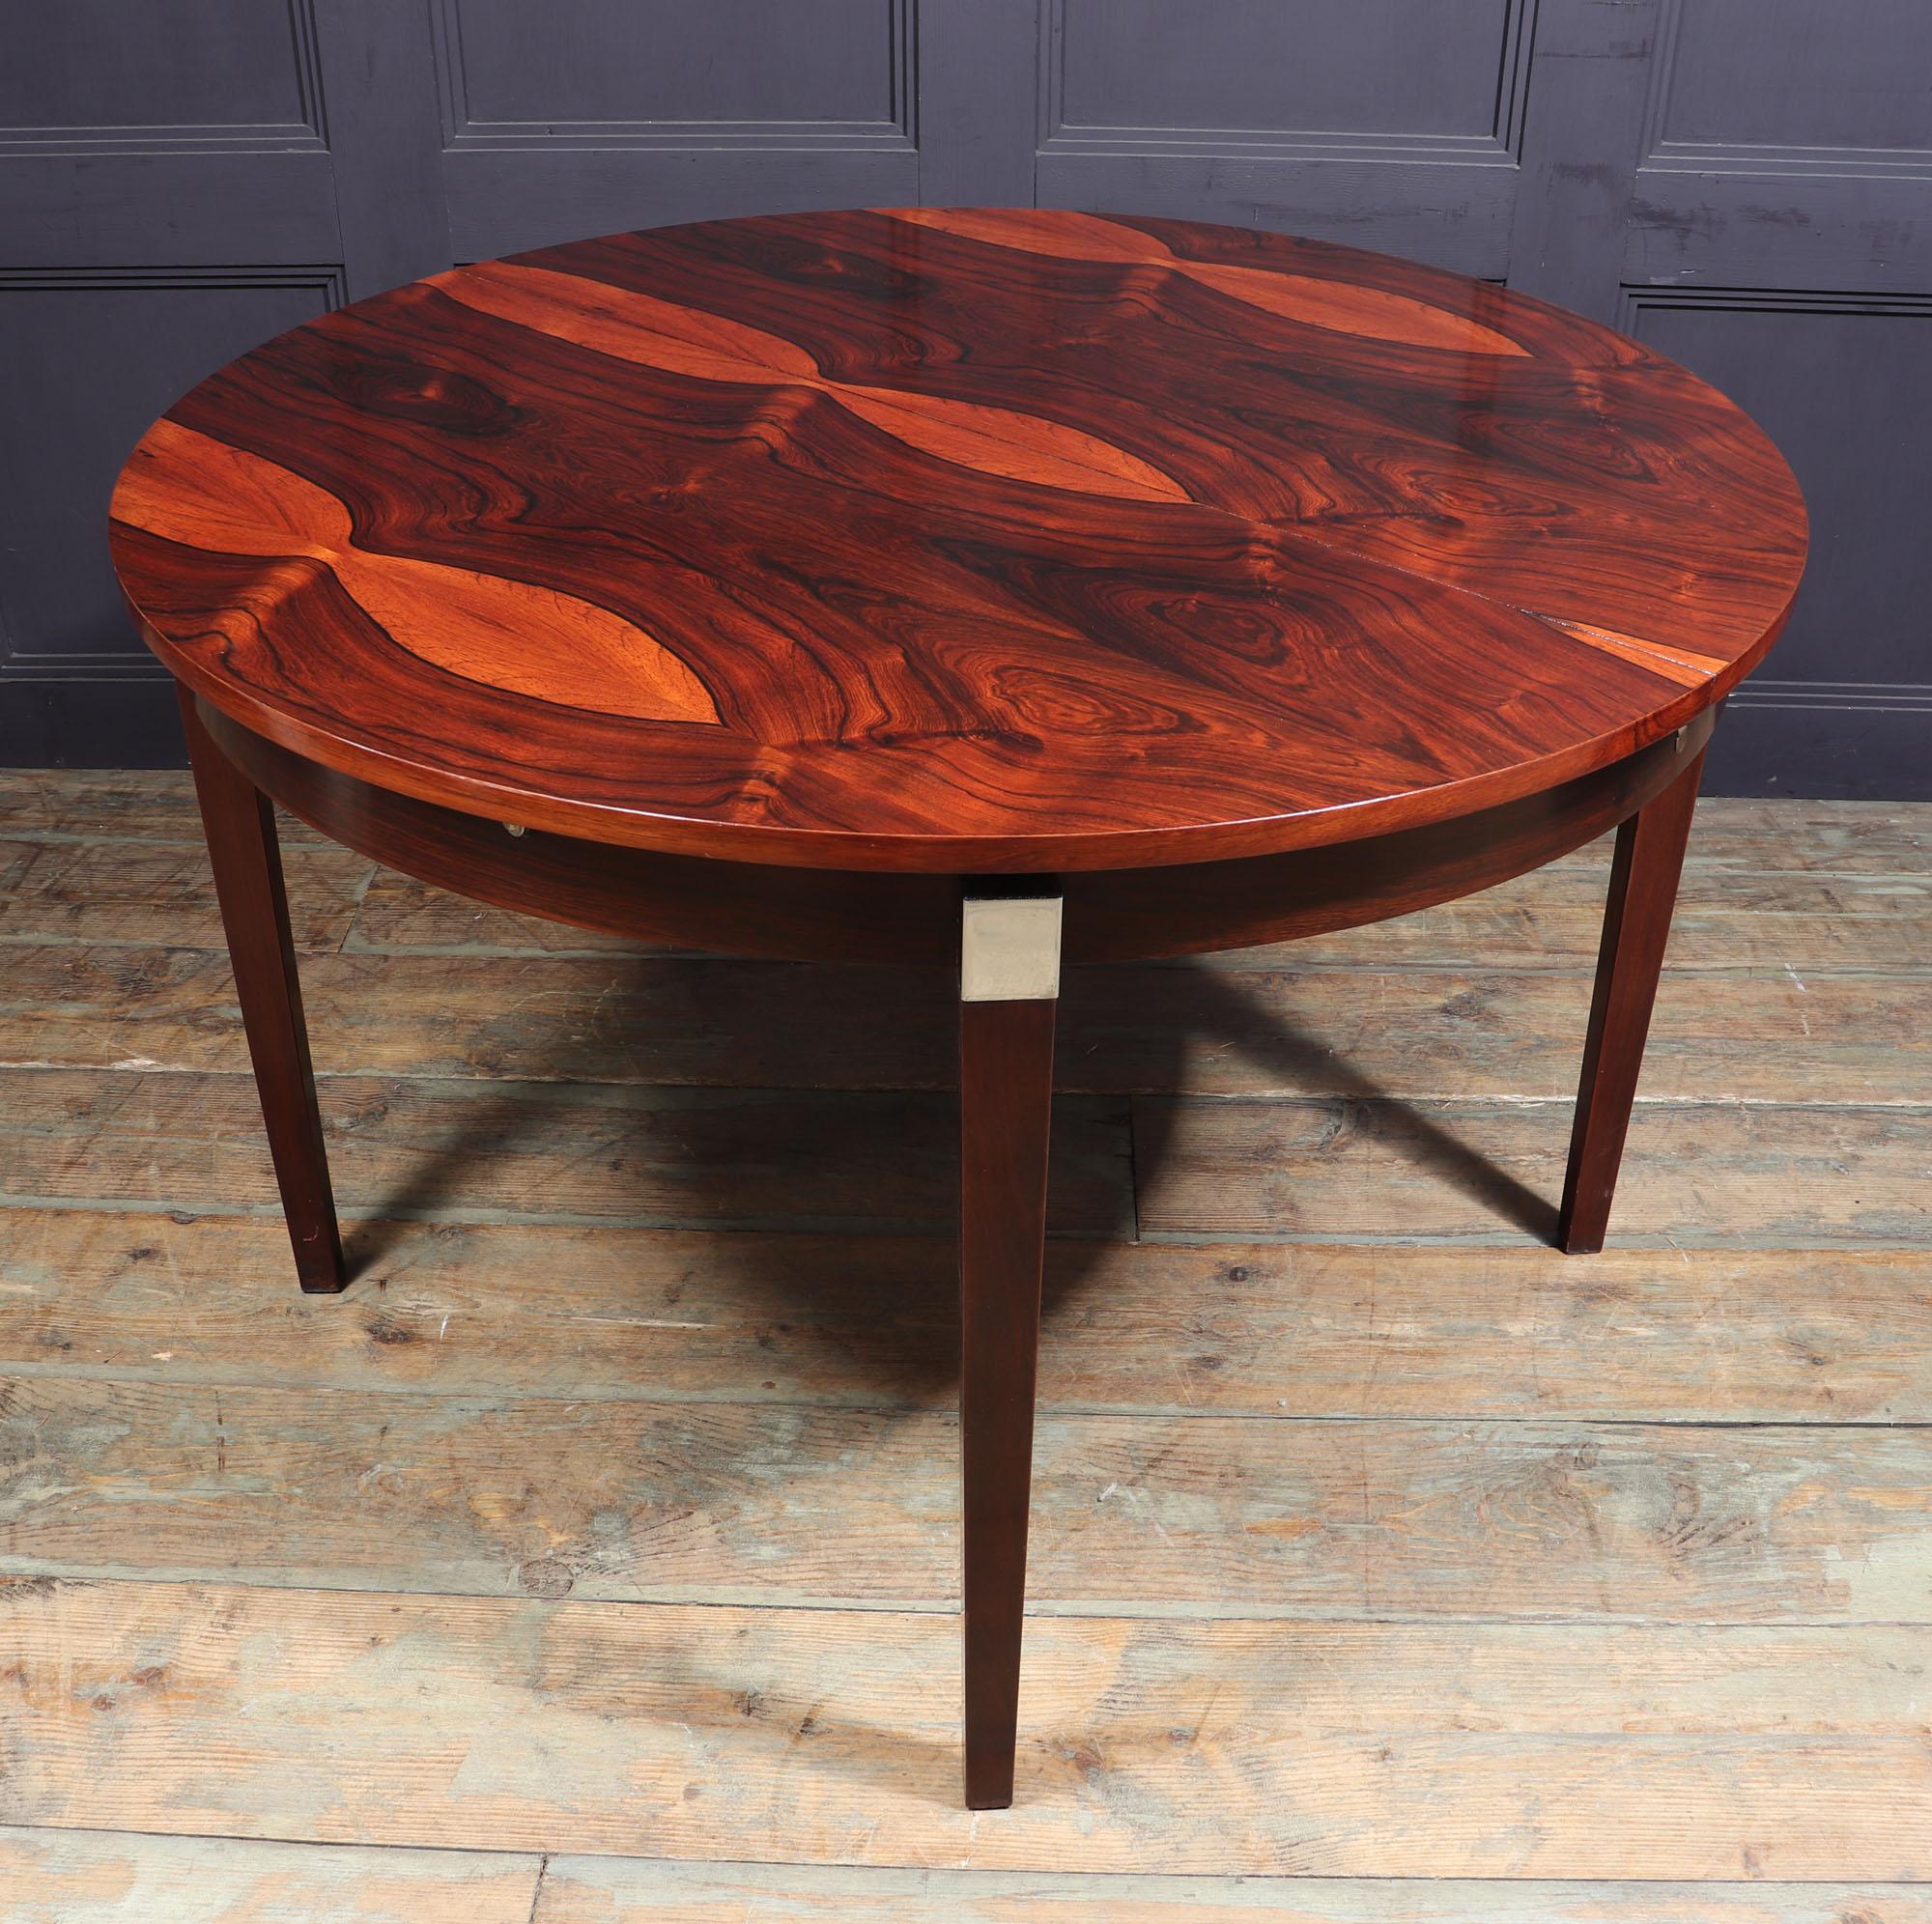 Midcentury dining table.
A midcentury extending circular dining table produced in France in the 1960s, it has mahogany square tapered legs with chromed steel detail to the top. The extendable top is rosewood that opes to reveal a butterfly leaf so